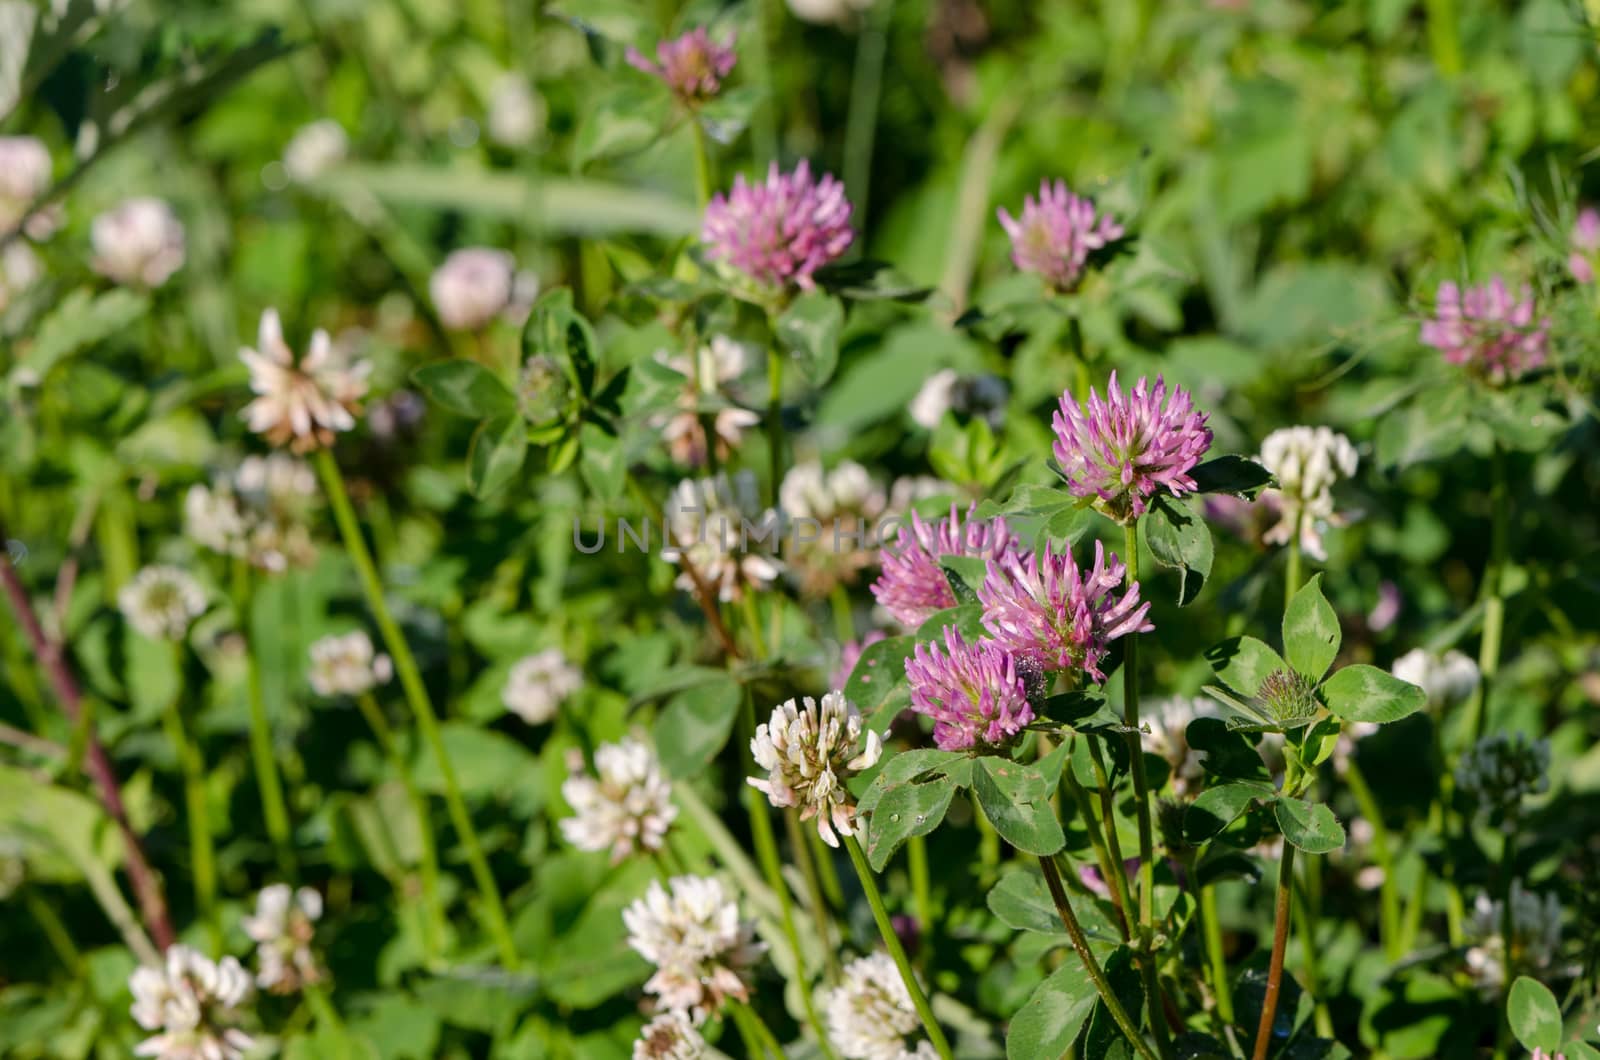 Closeup of dewy white and red clover plants grow in meadow.